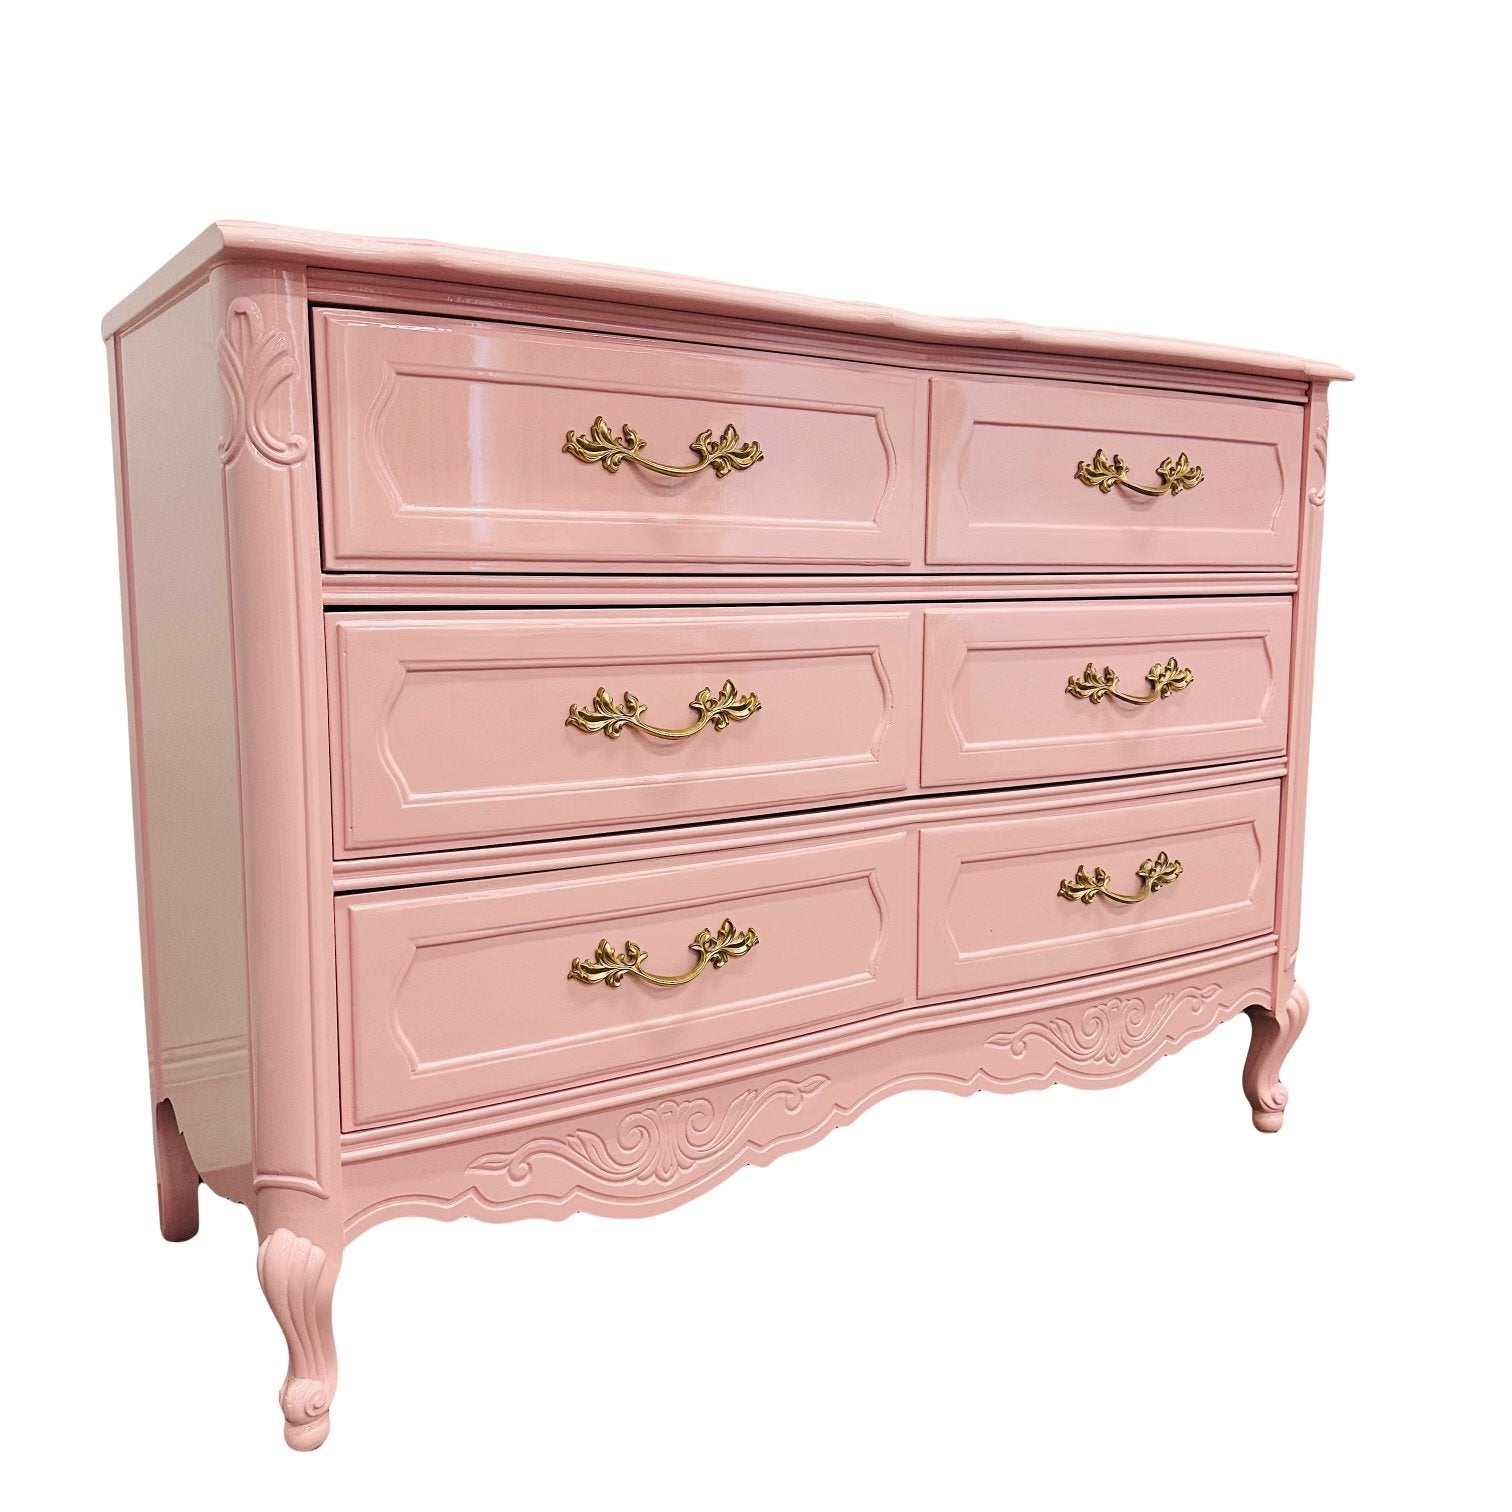 SOLD: French Provincial Dresser in Unspoken Love by Benjamin Moore